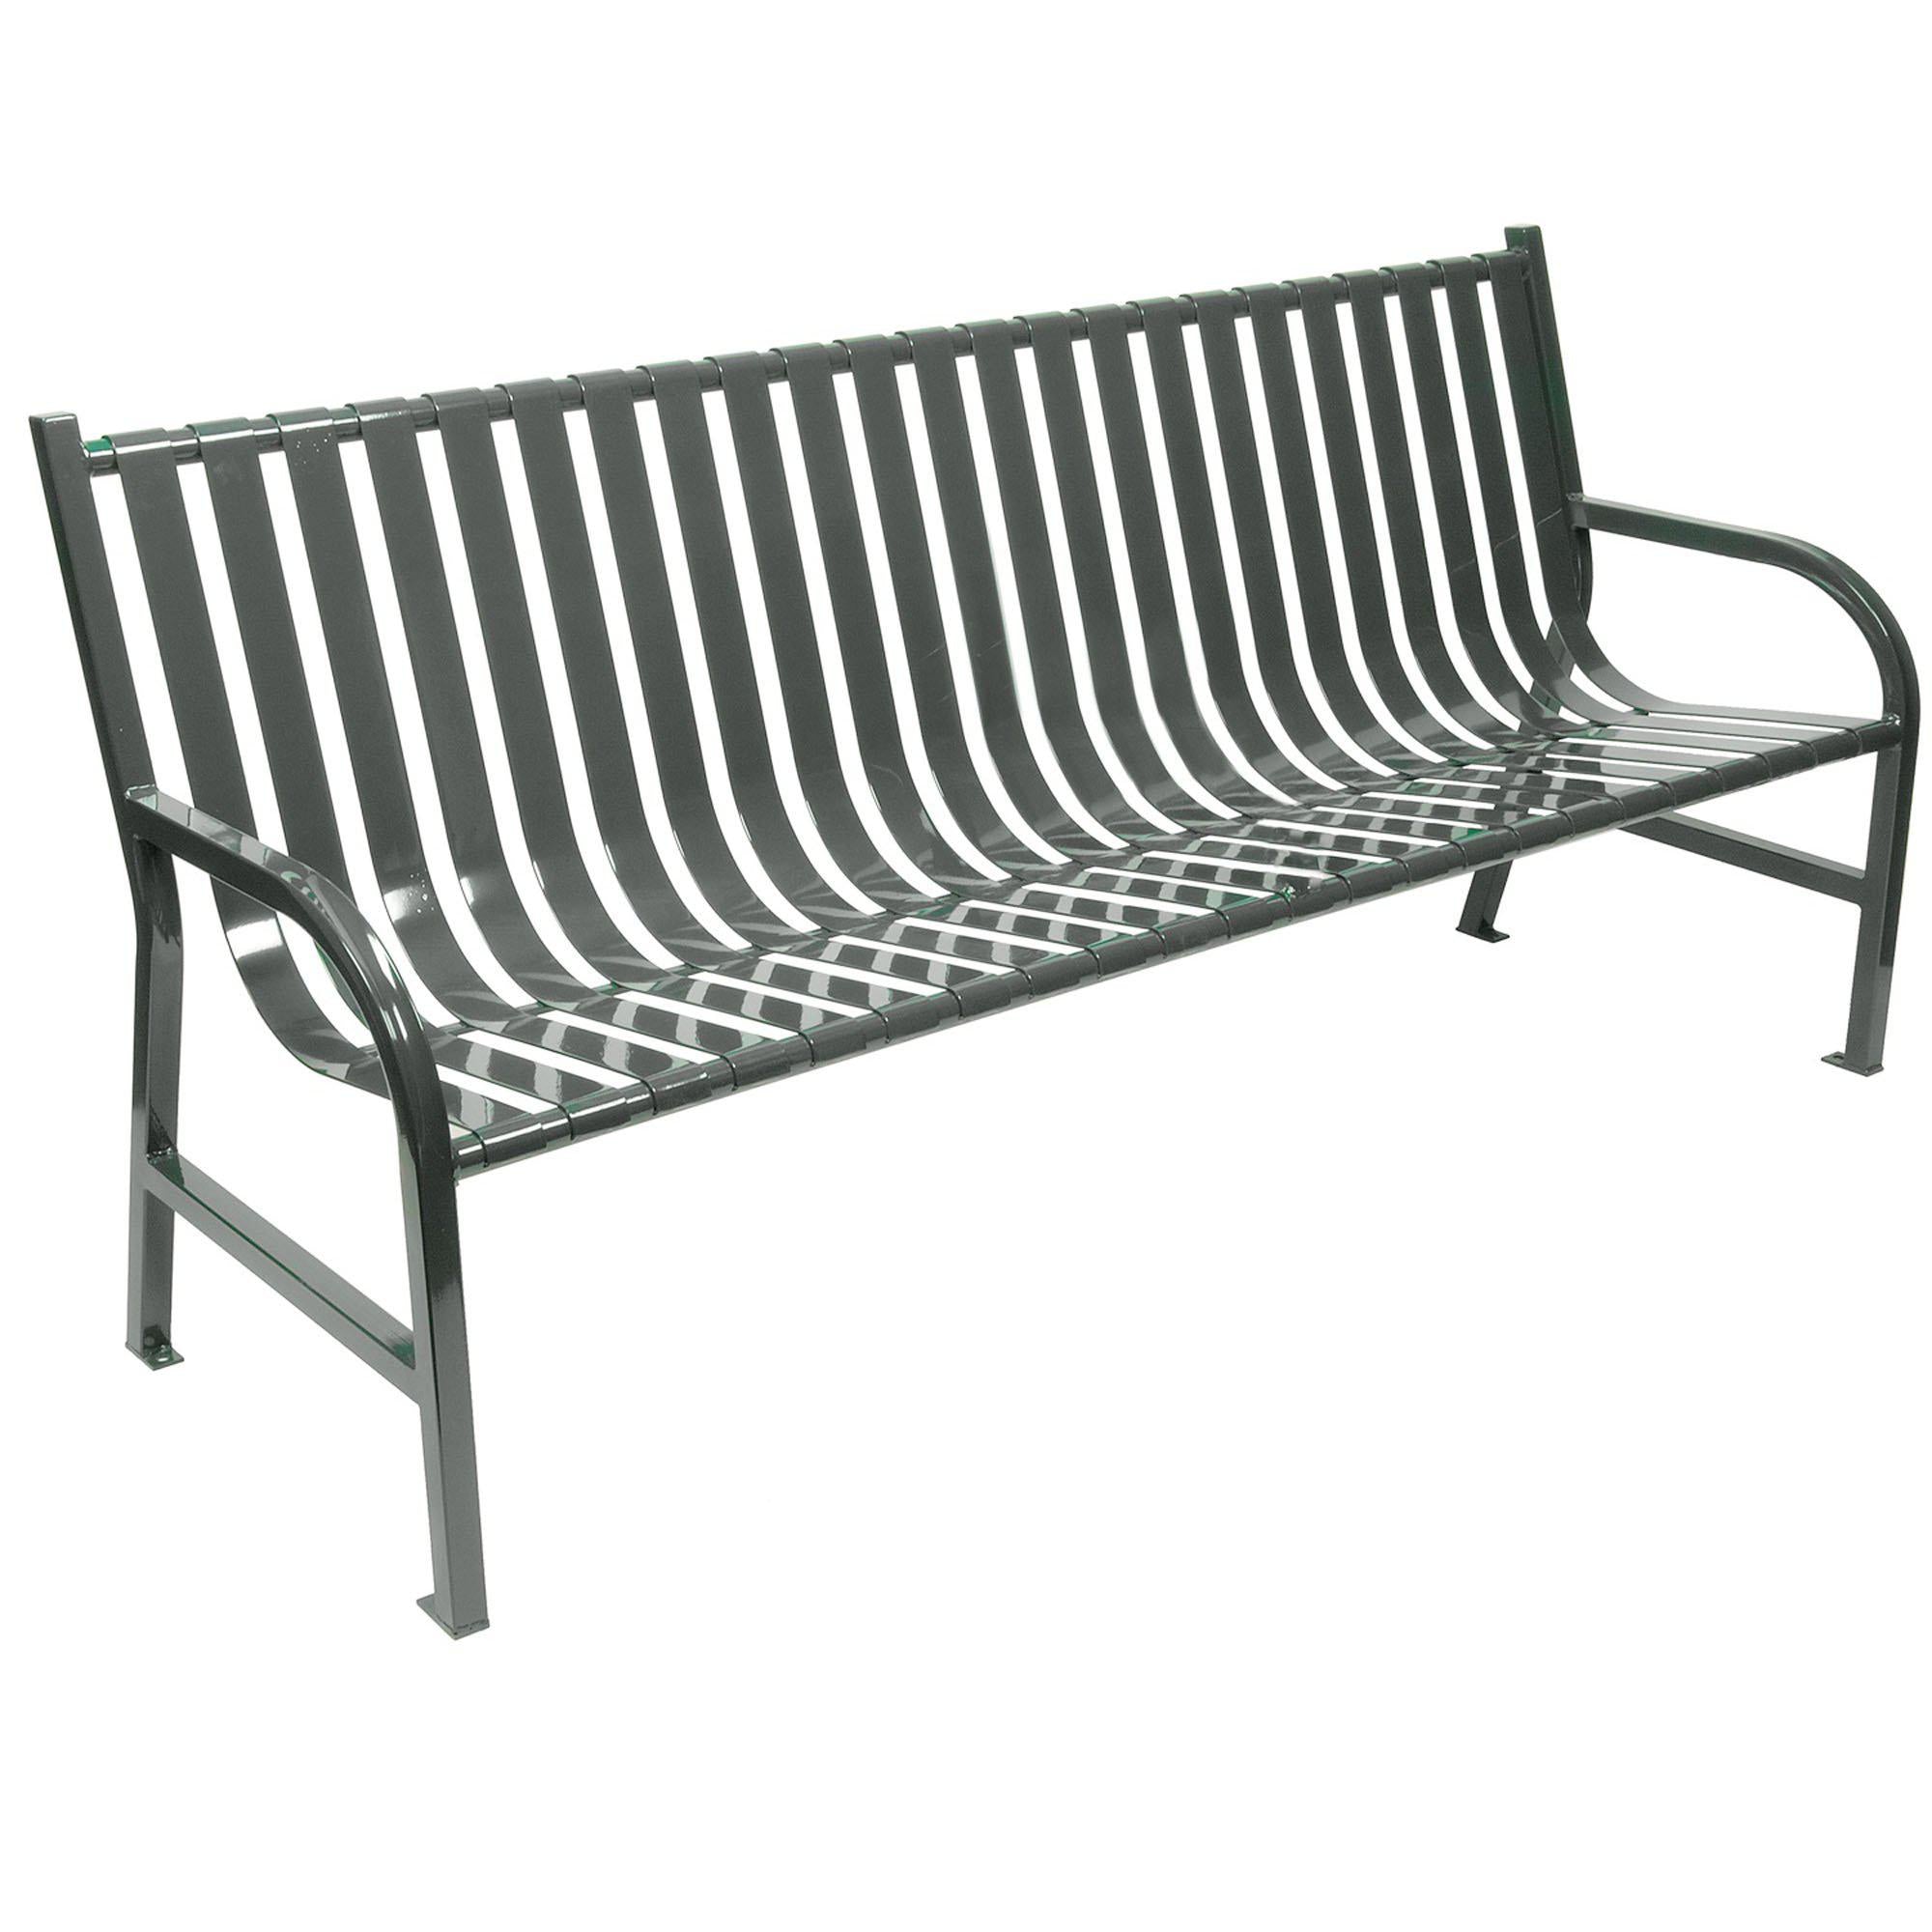 Oakley Collection Slatted Outdoor Bench, 72" L